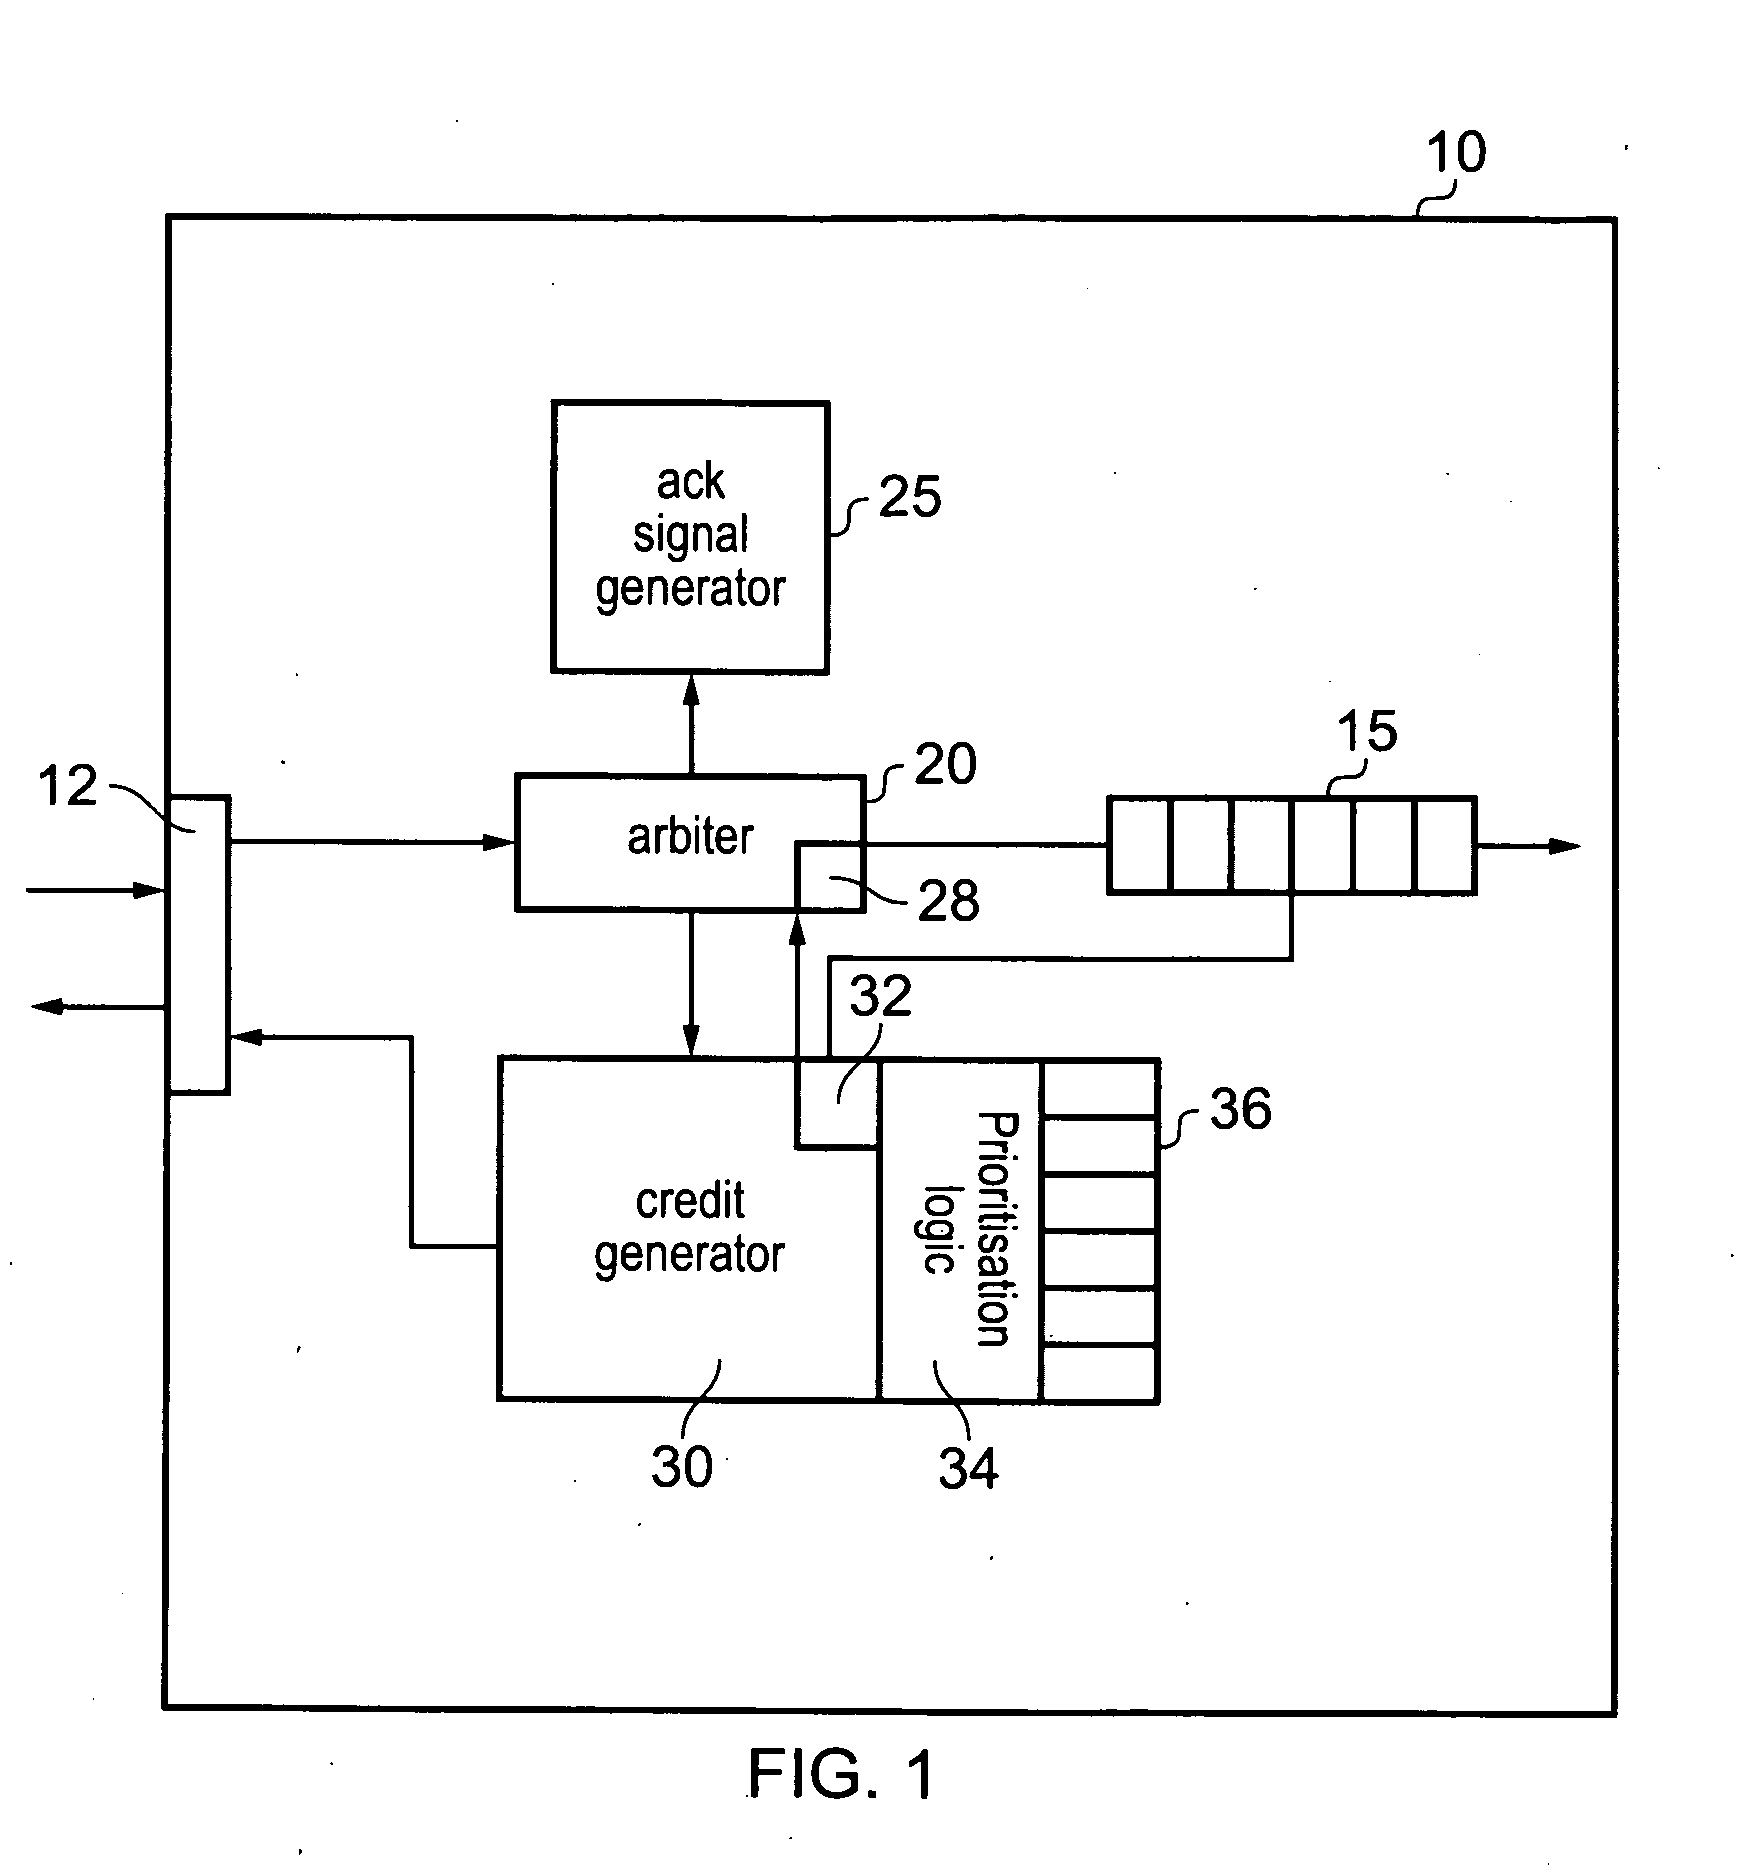 Dynamic resource allocation for transaction requests issued by initiator devices to recipient devices